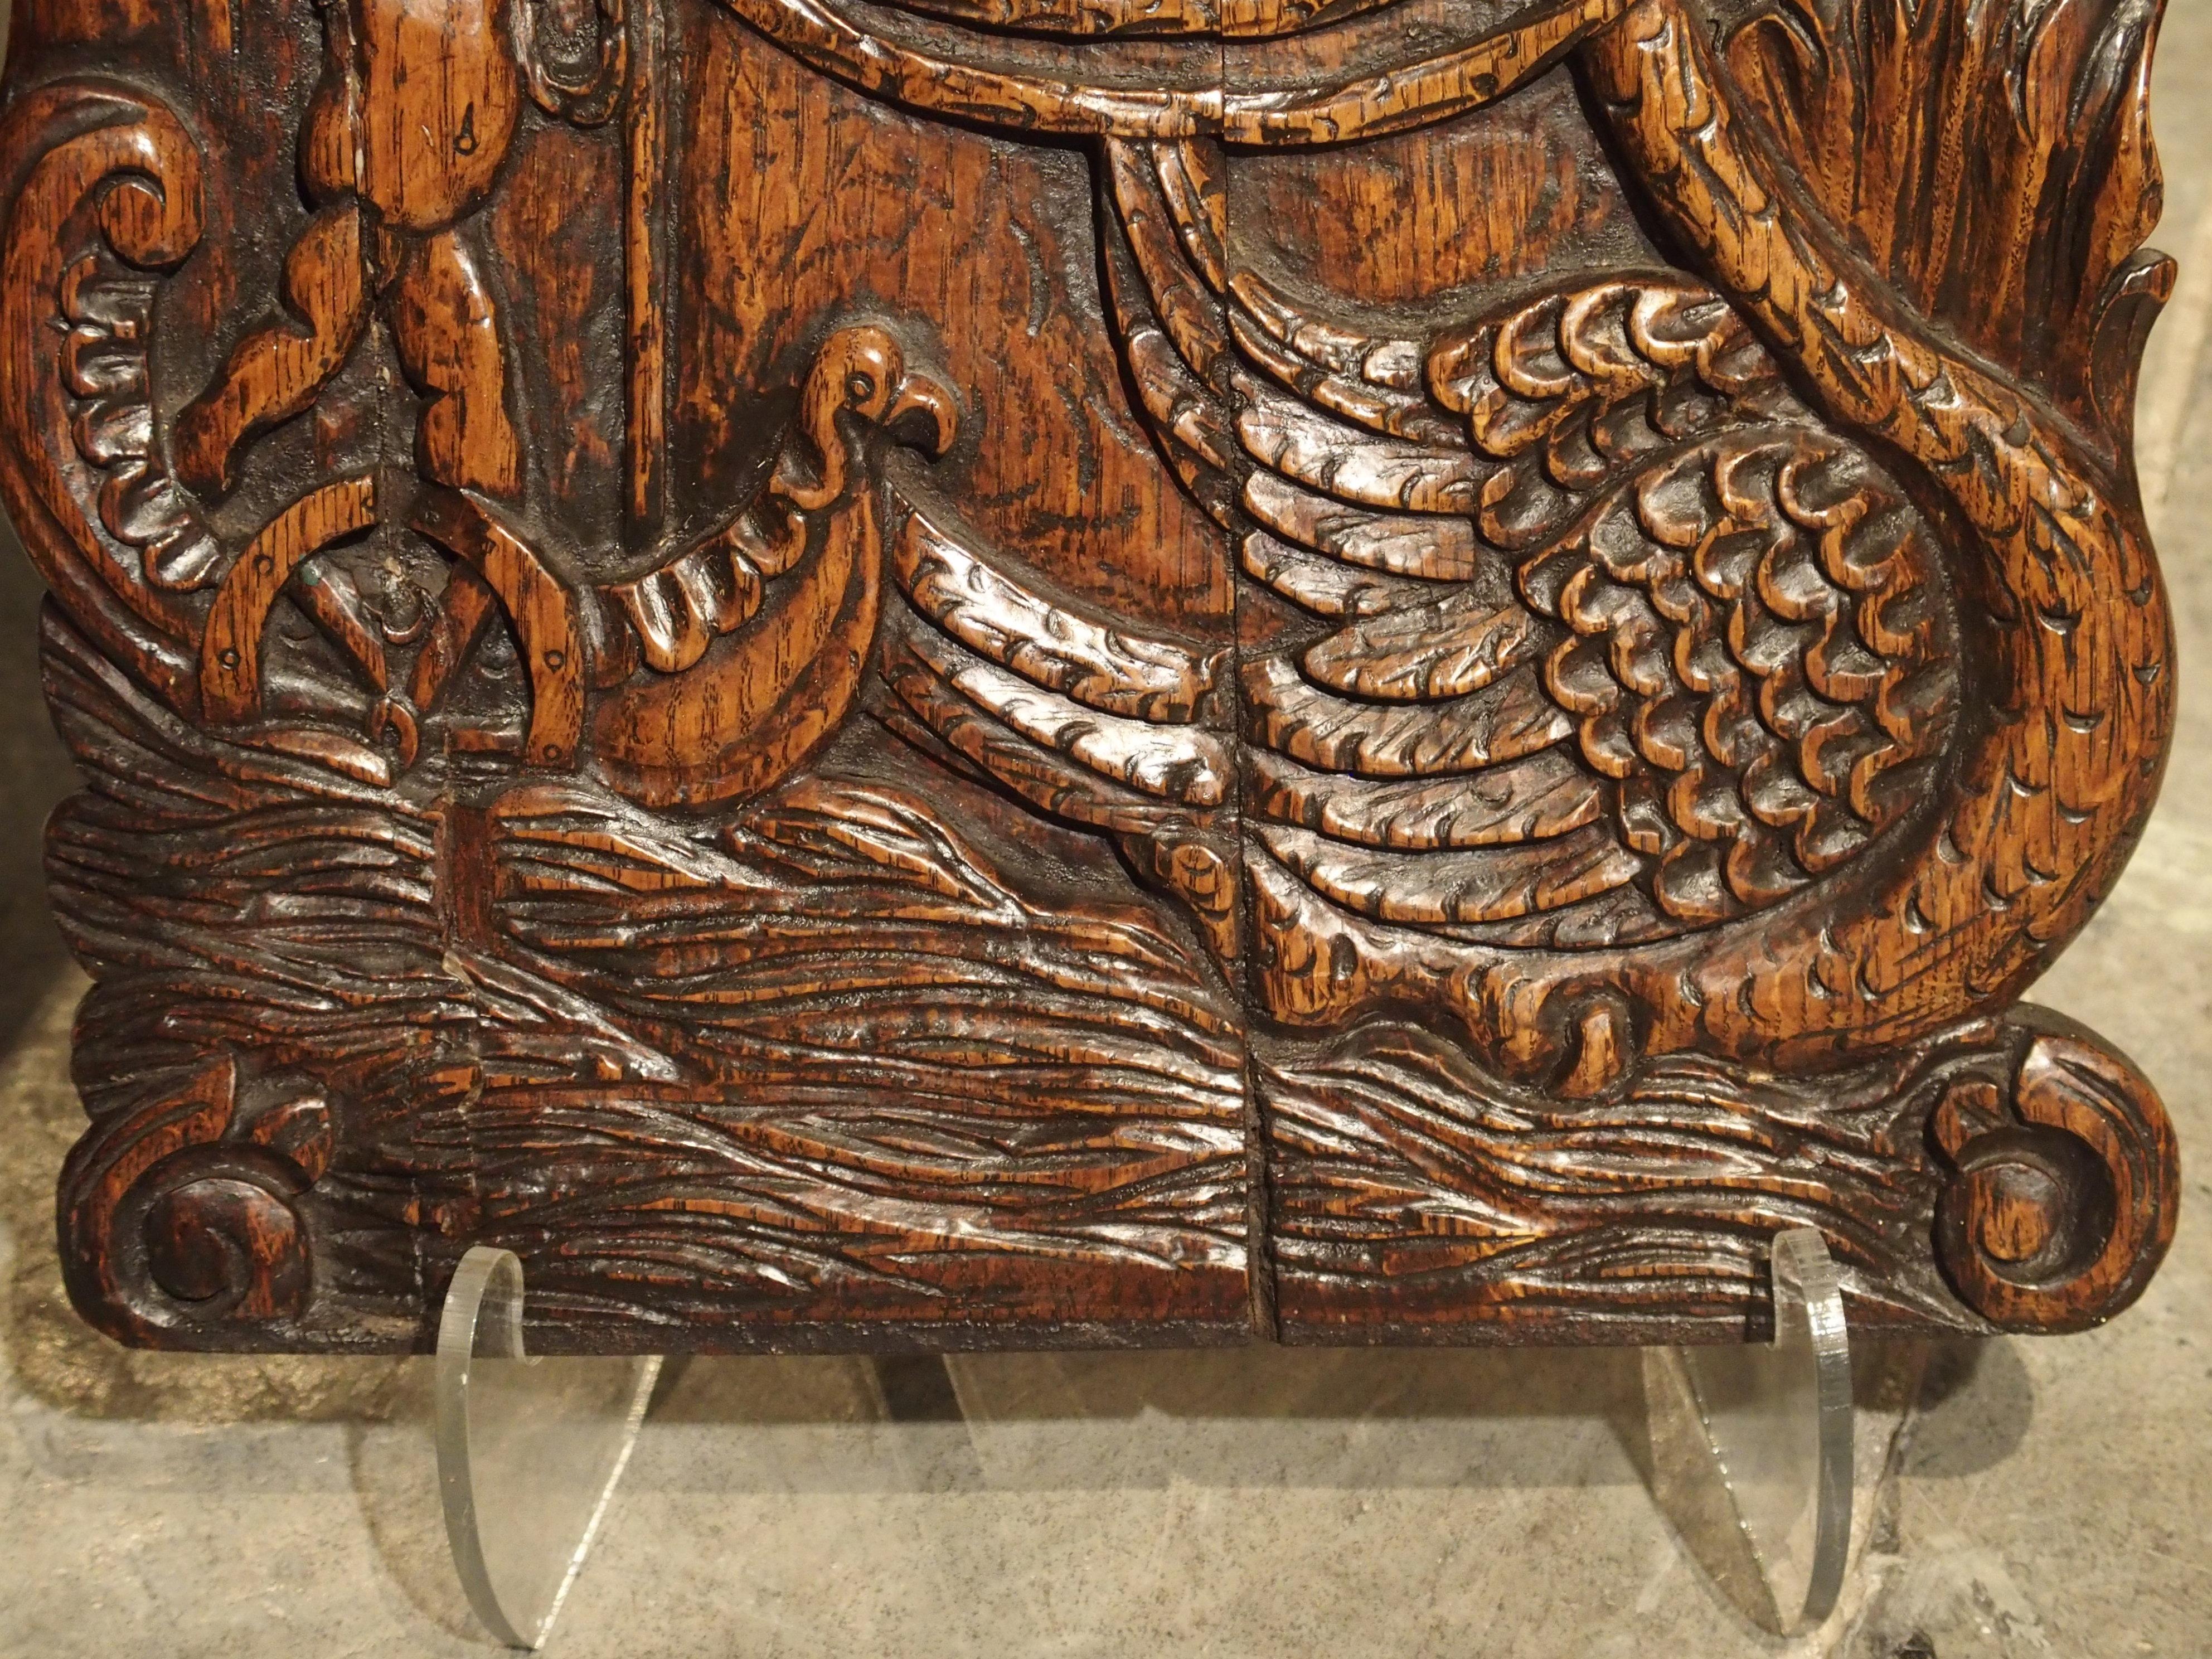 17th Century Dutch Golden Age Carving of the Swan Knight 1